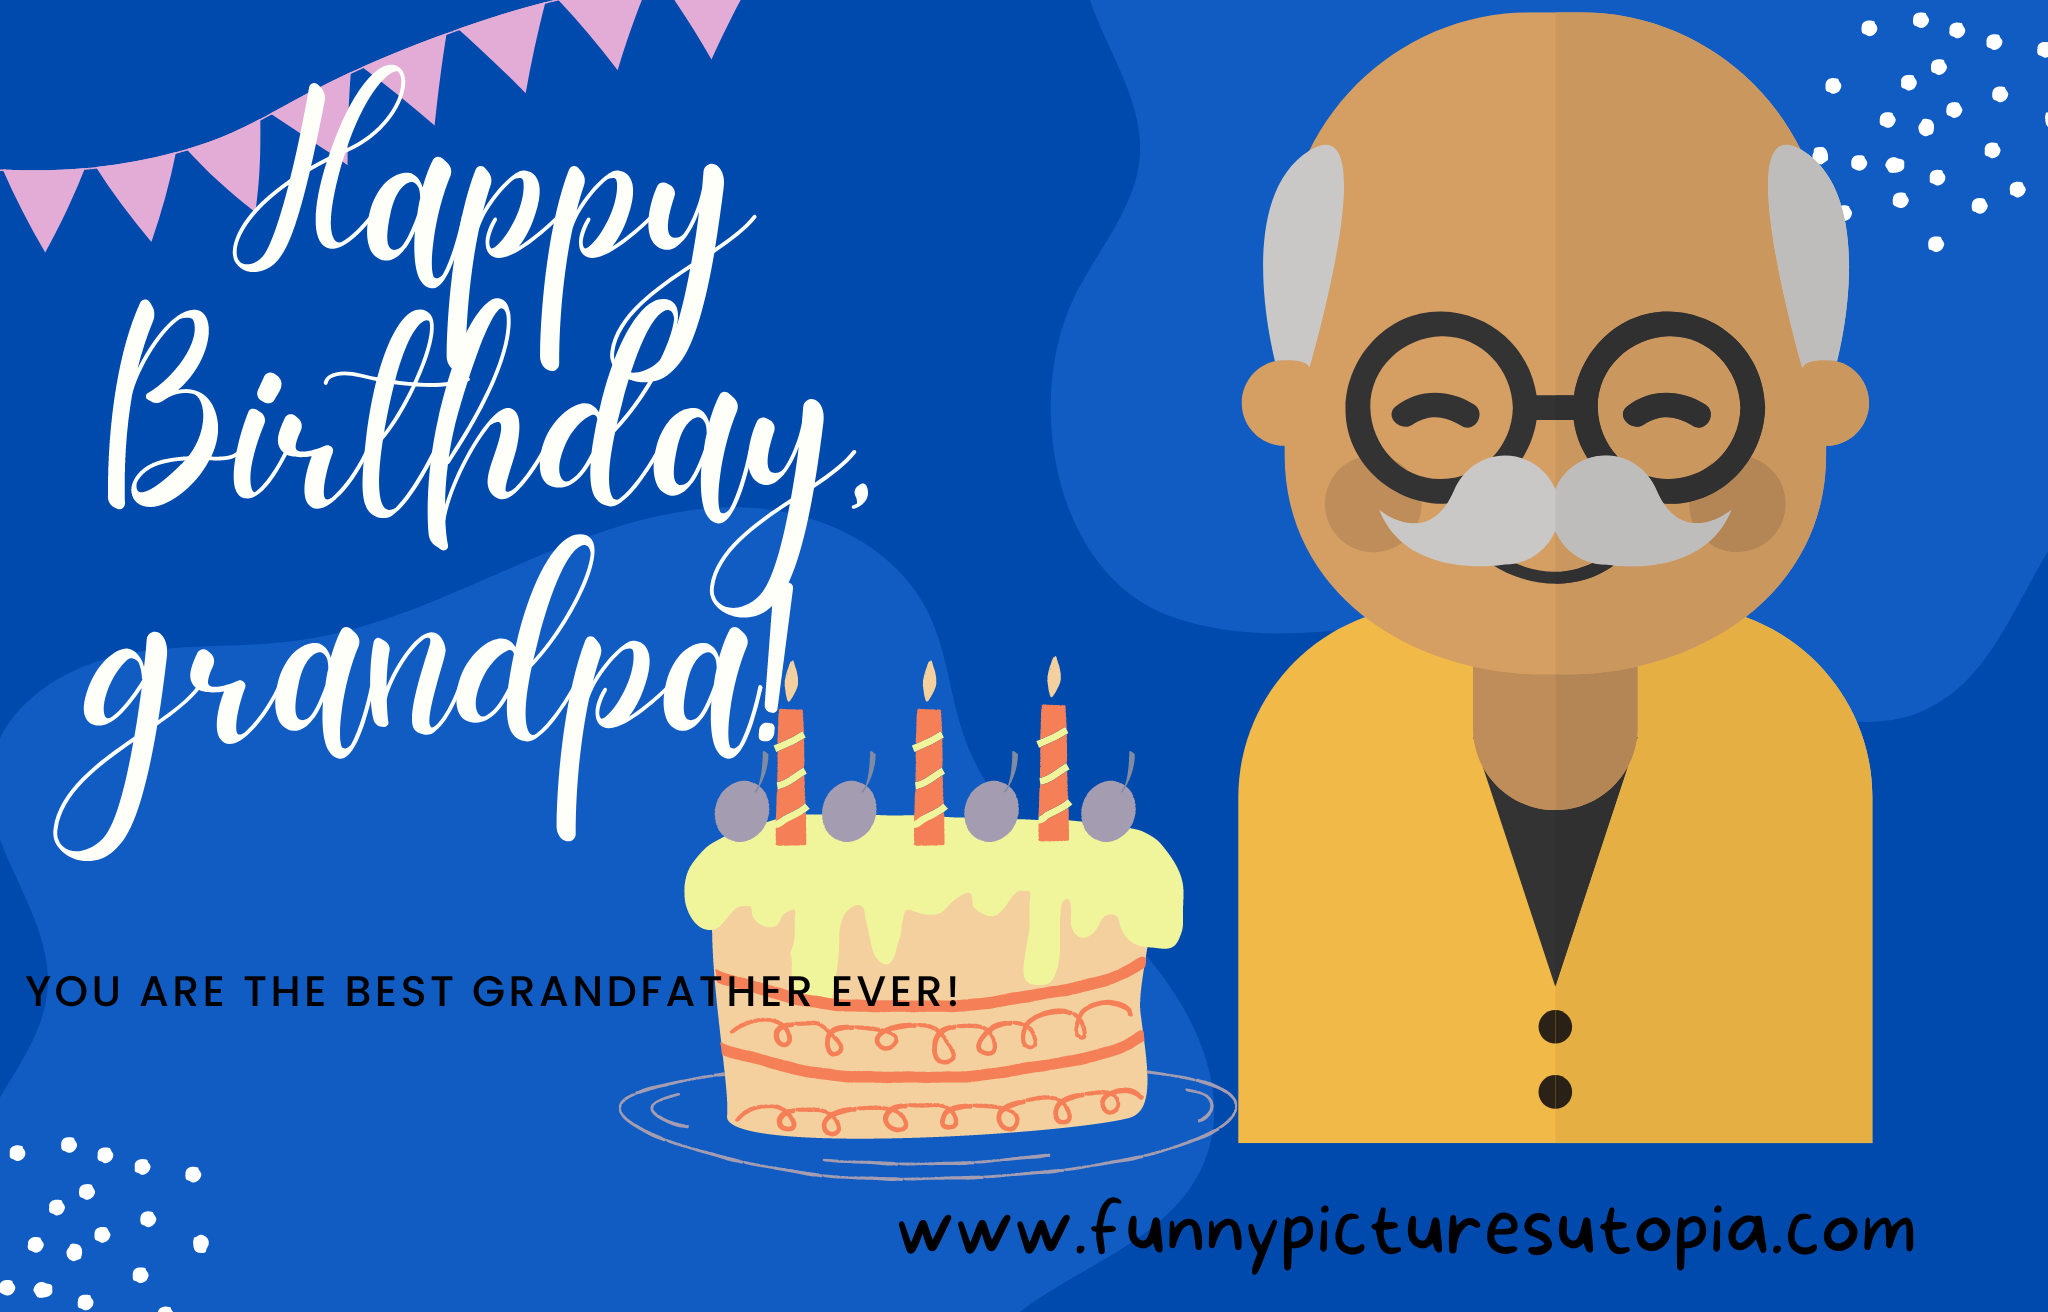 Sweetest Birthday Wishes for Grandfather